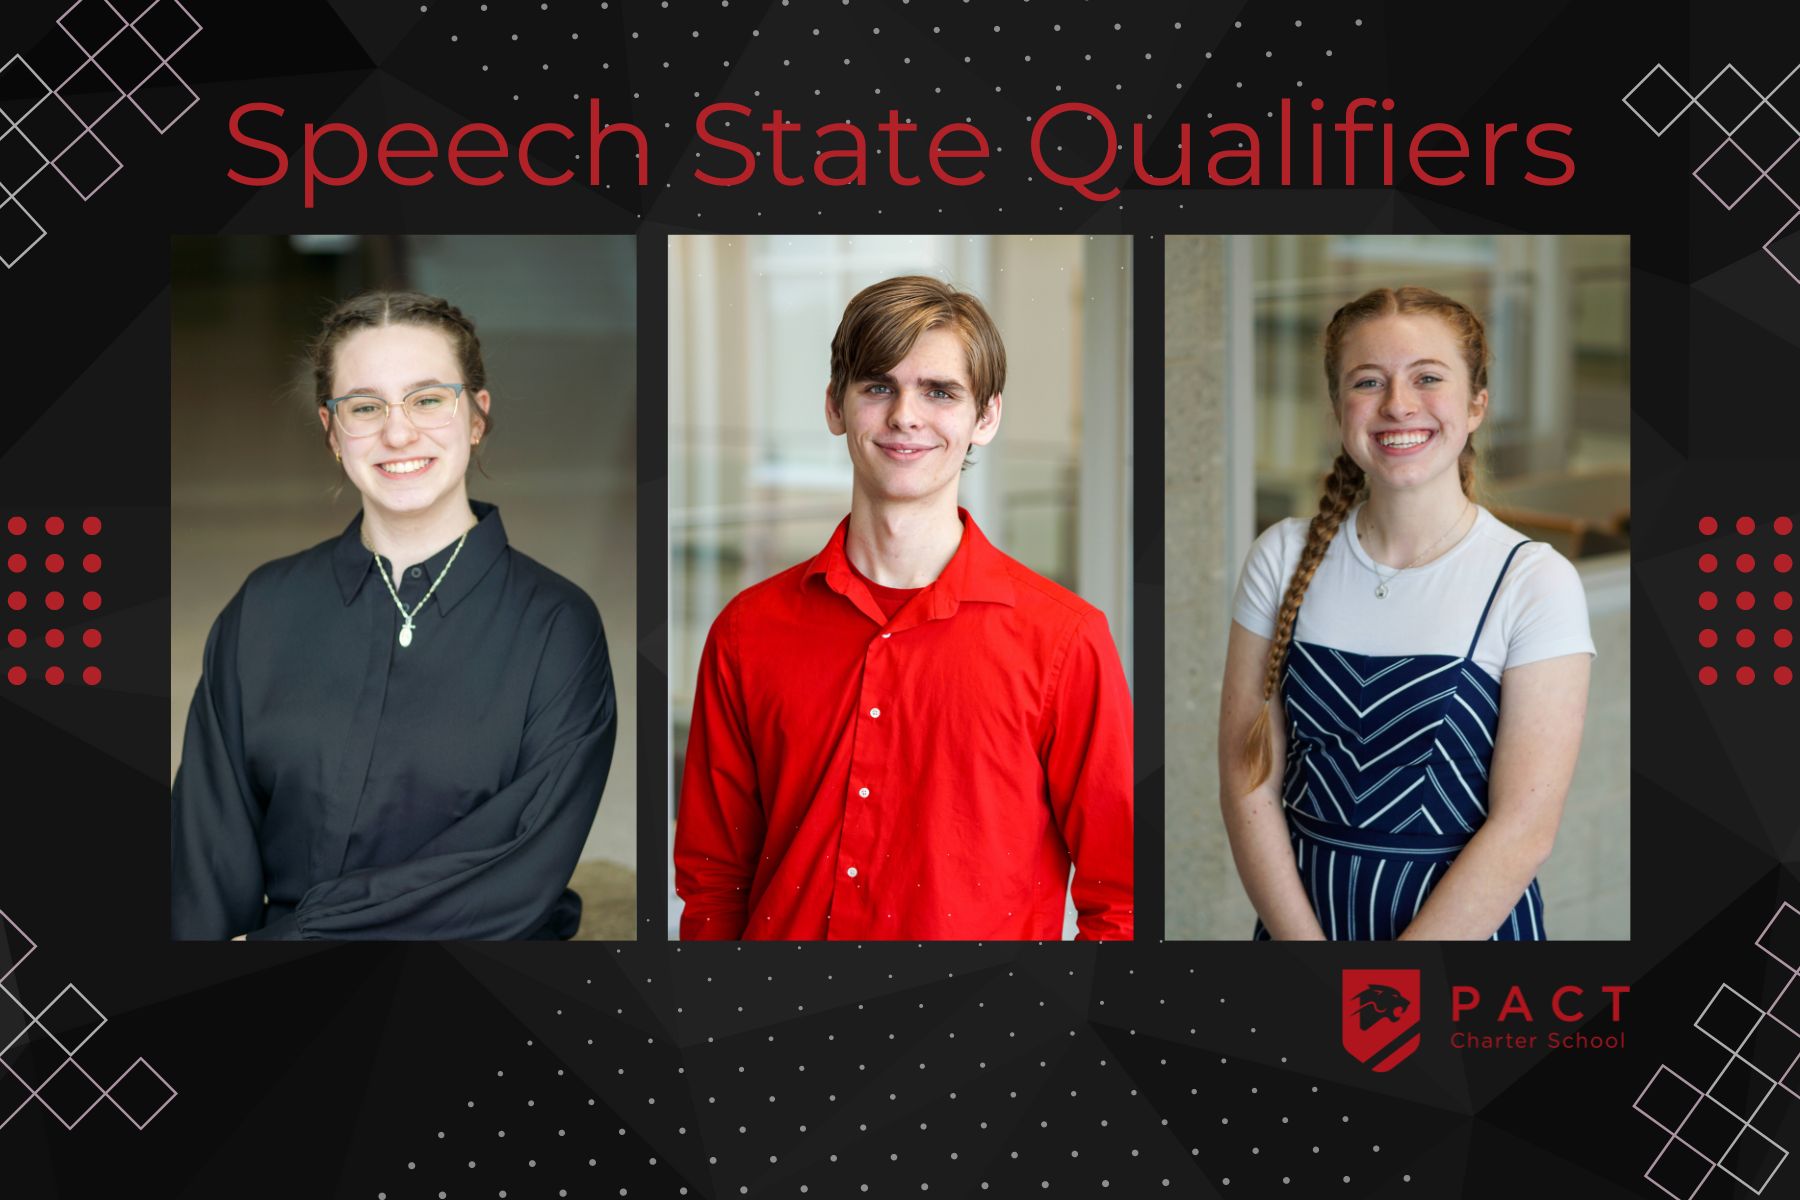 PACT Speech Heads to State